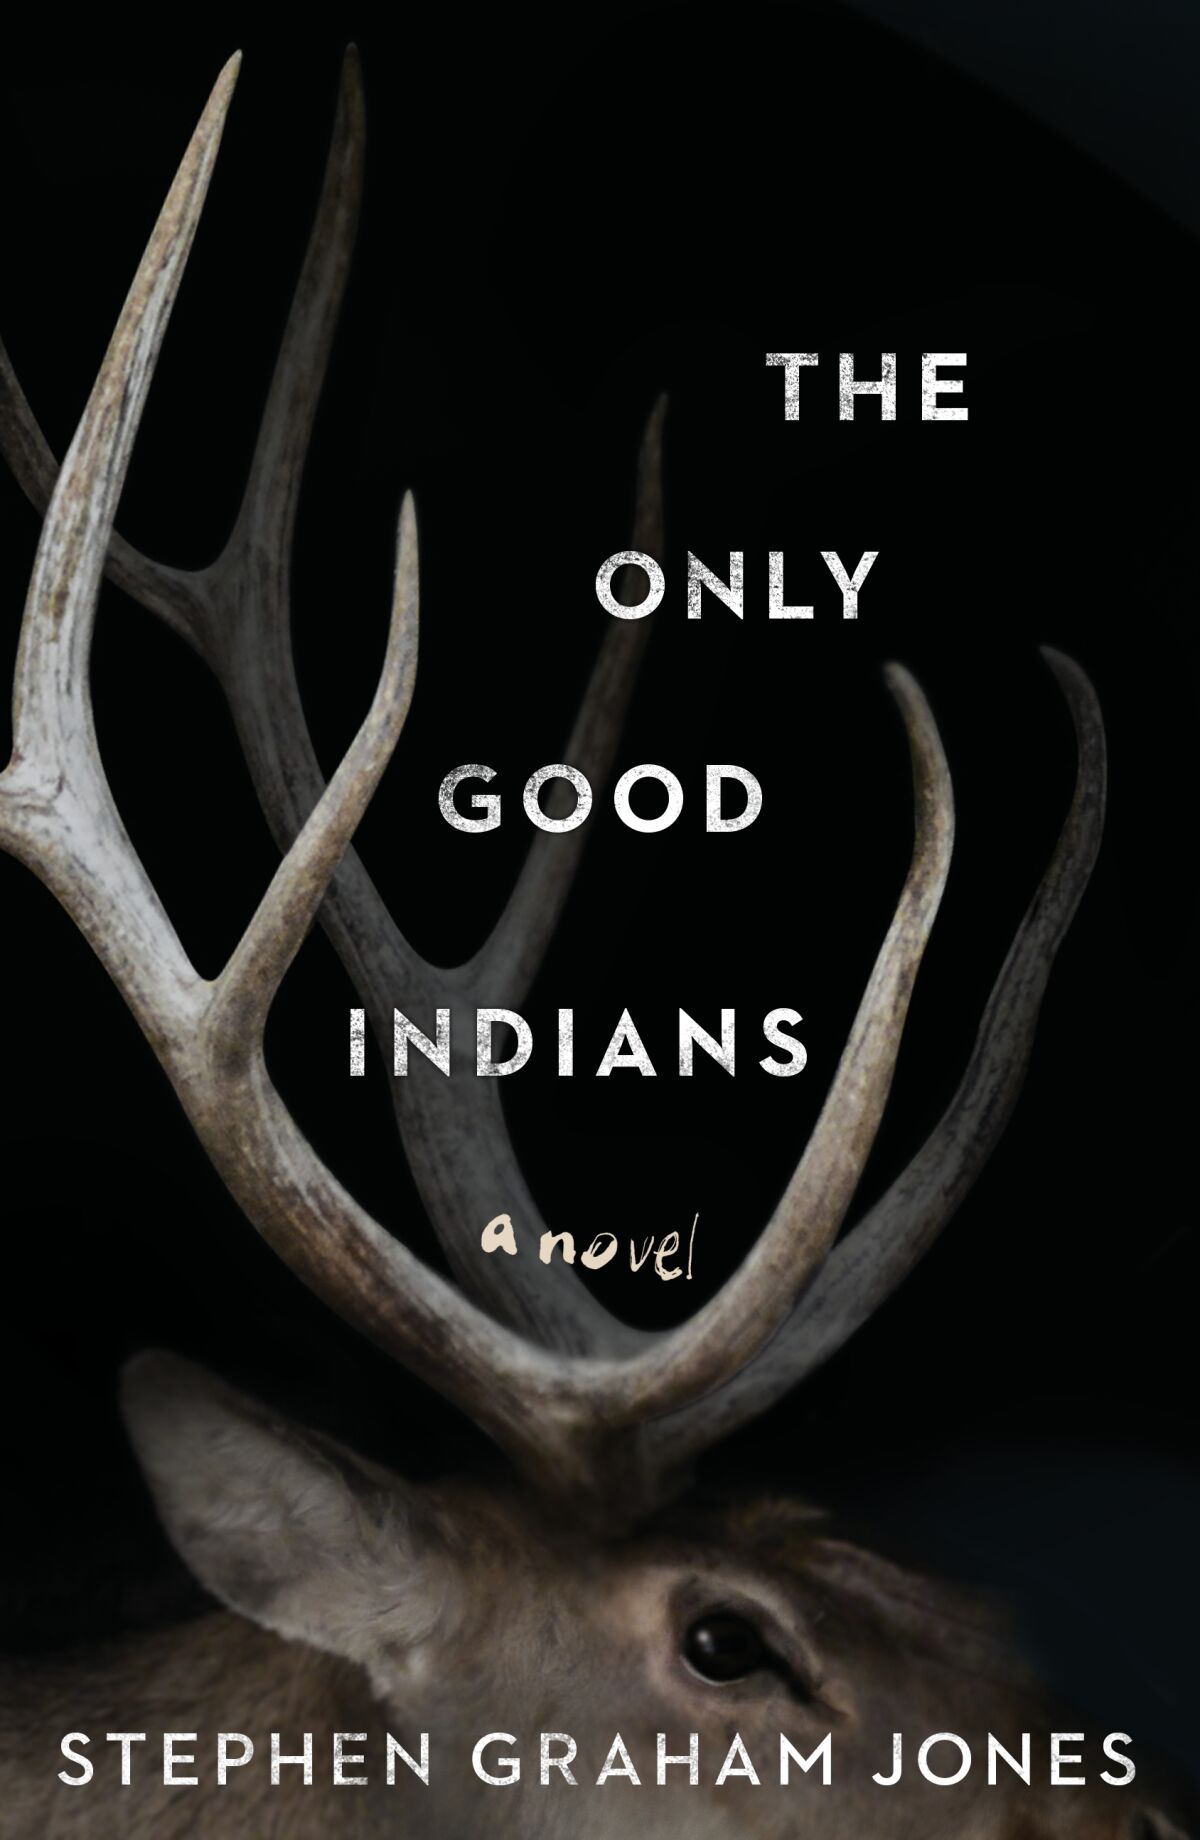 Prominent antlers atop the head of an elk on a black background of a book cover